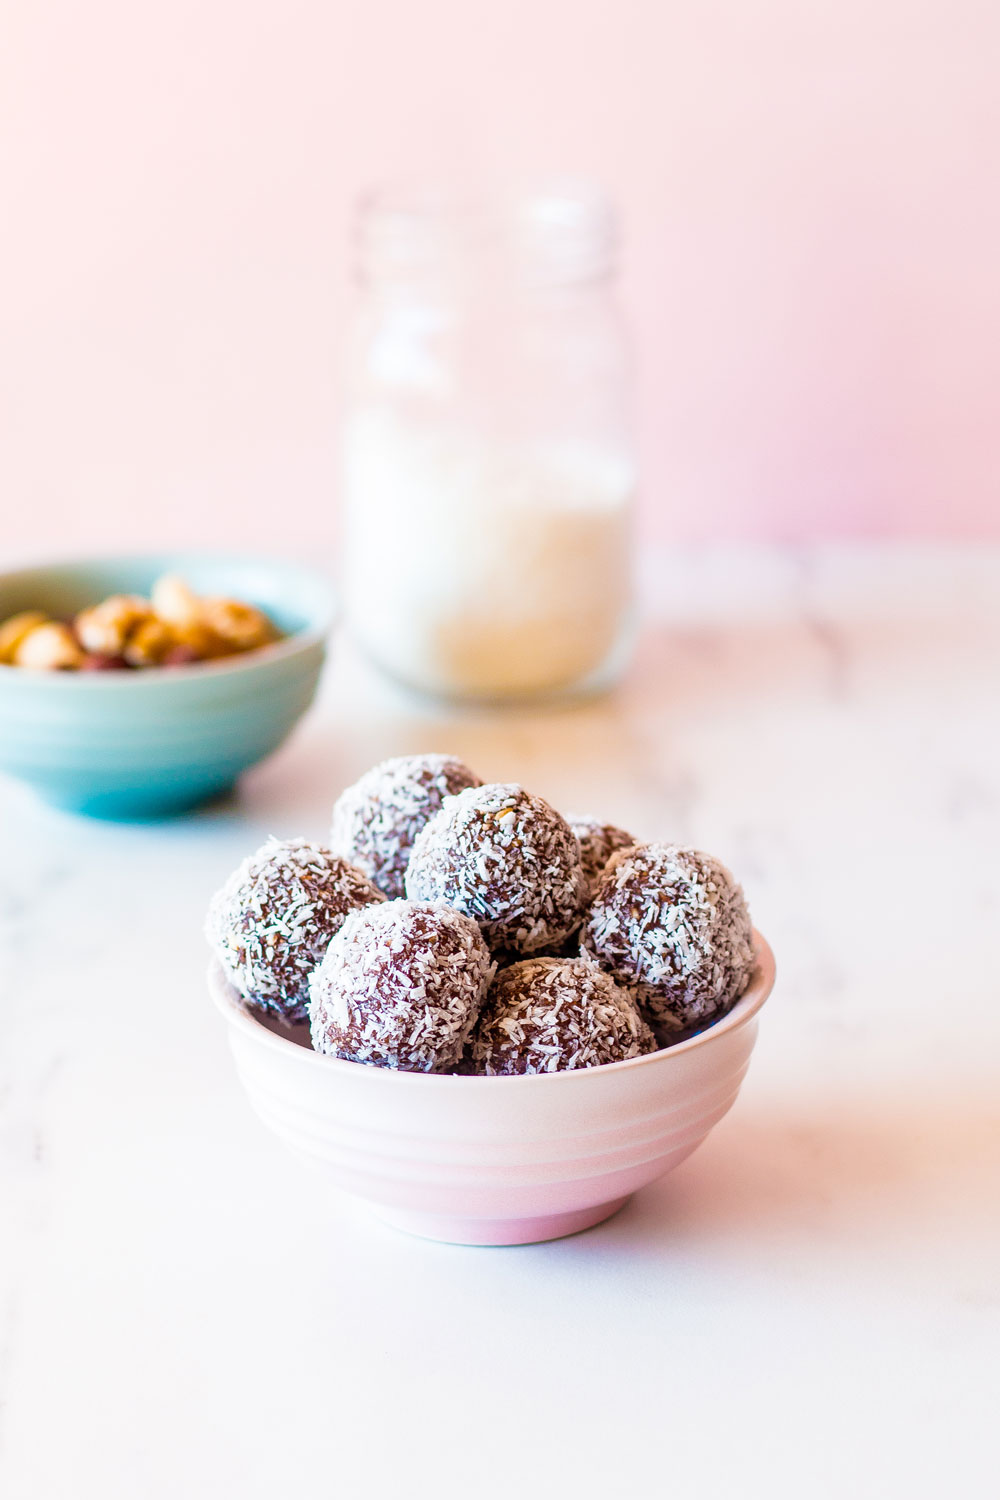 Are you tired of always craving sweets and binging on sugary snacks? If the answer is yes, you need to look for nourishing options that are equally delicious and able to soothe and help reduce your cravings, like these Chocolate Coconut Energy Bites. https://www.spotebi.com/recipes/chocolate-coconut-energy-bites-recipe/